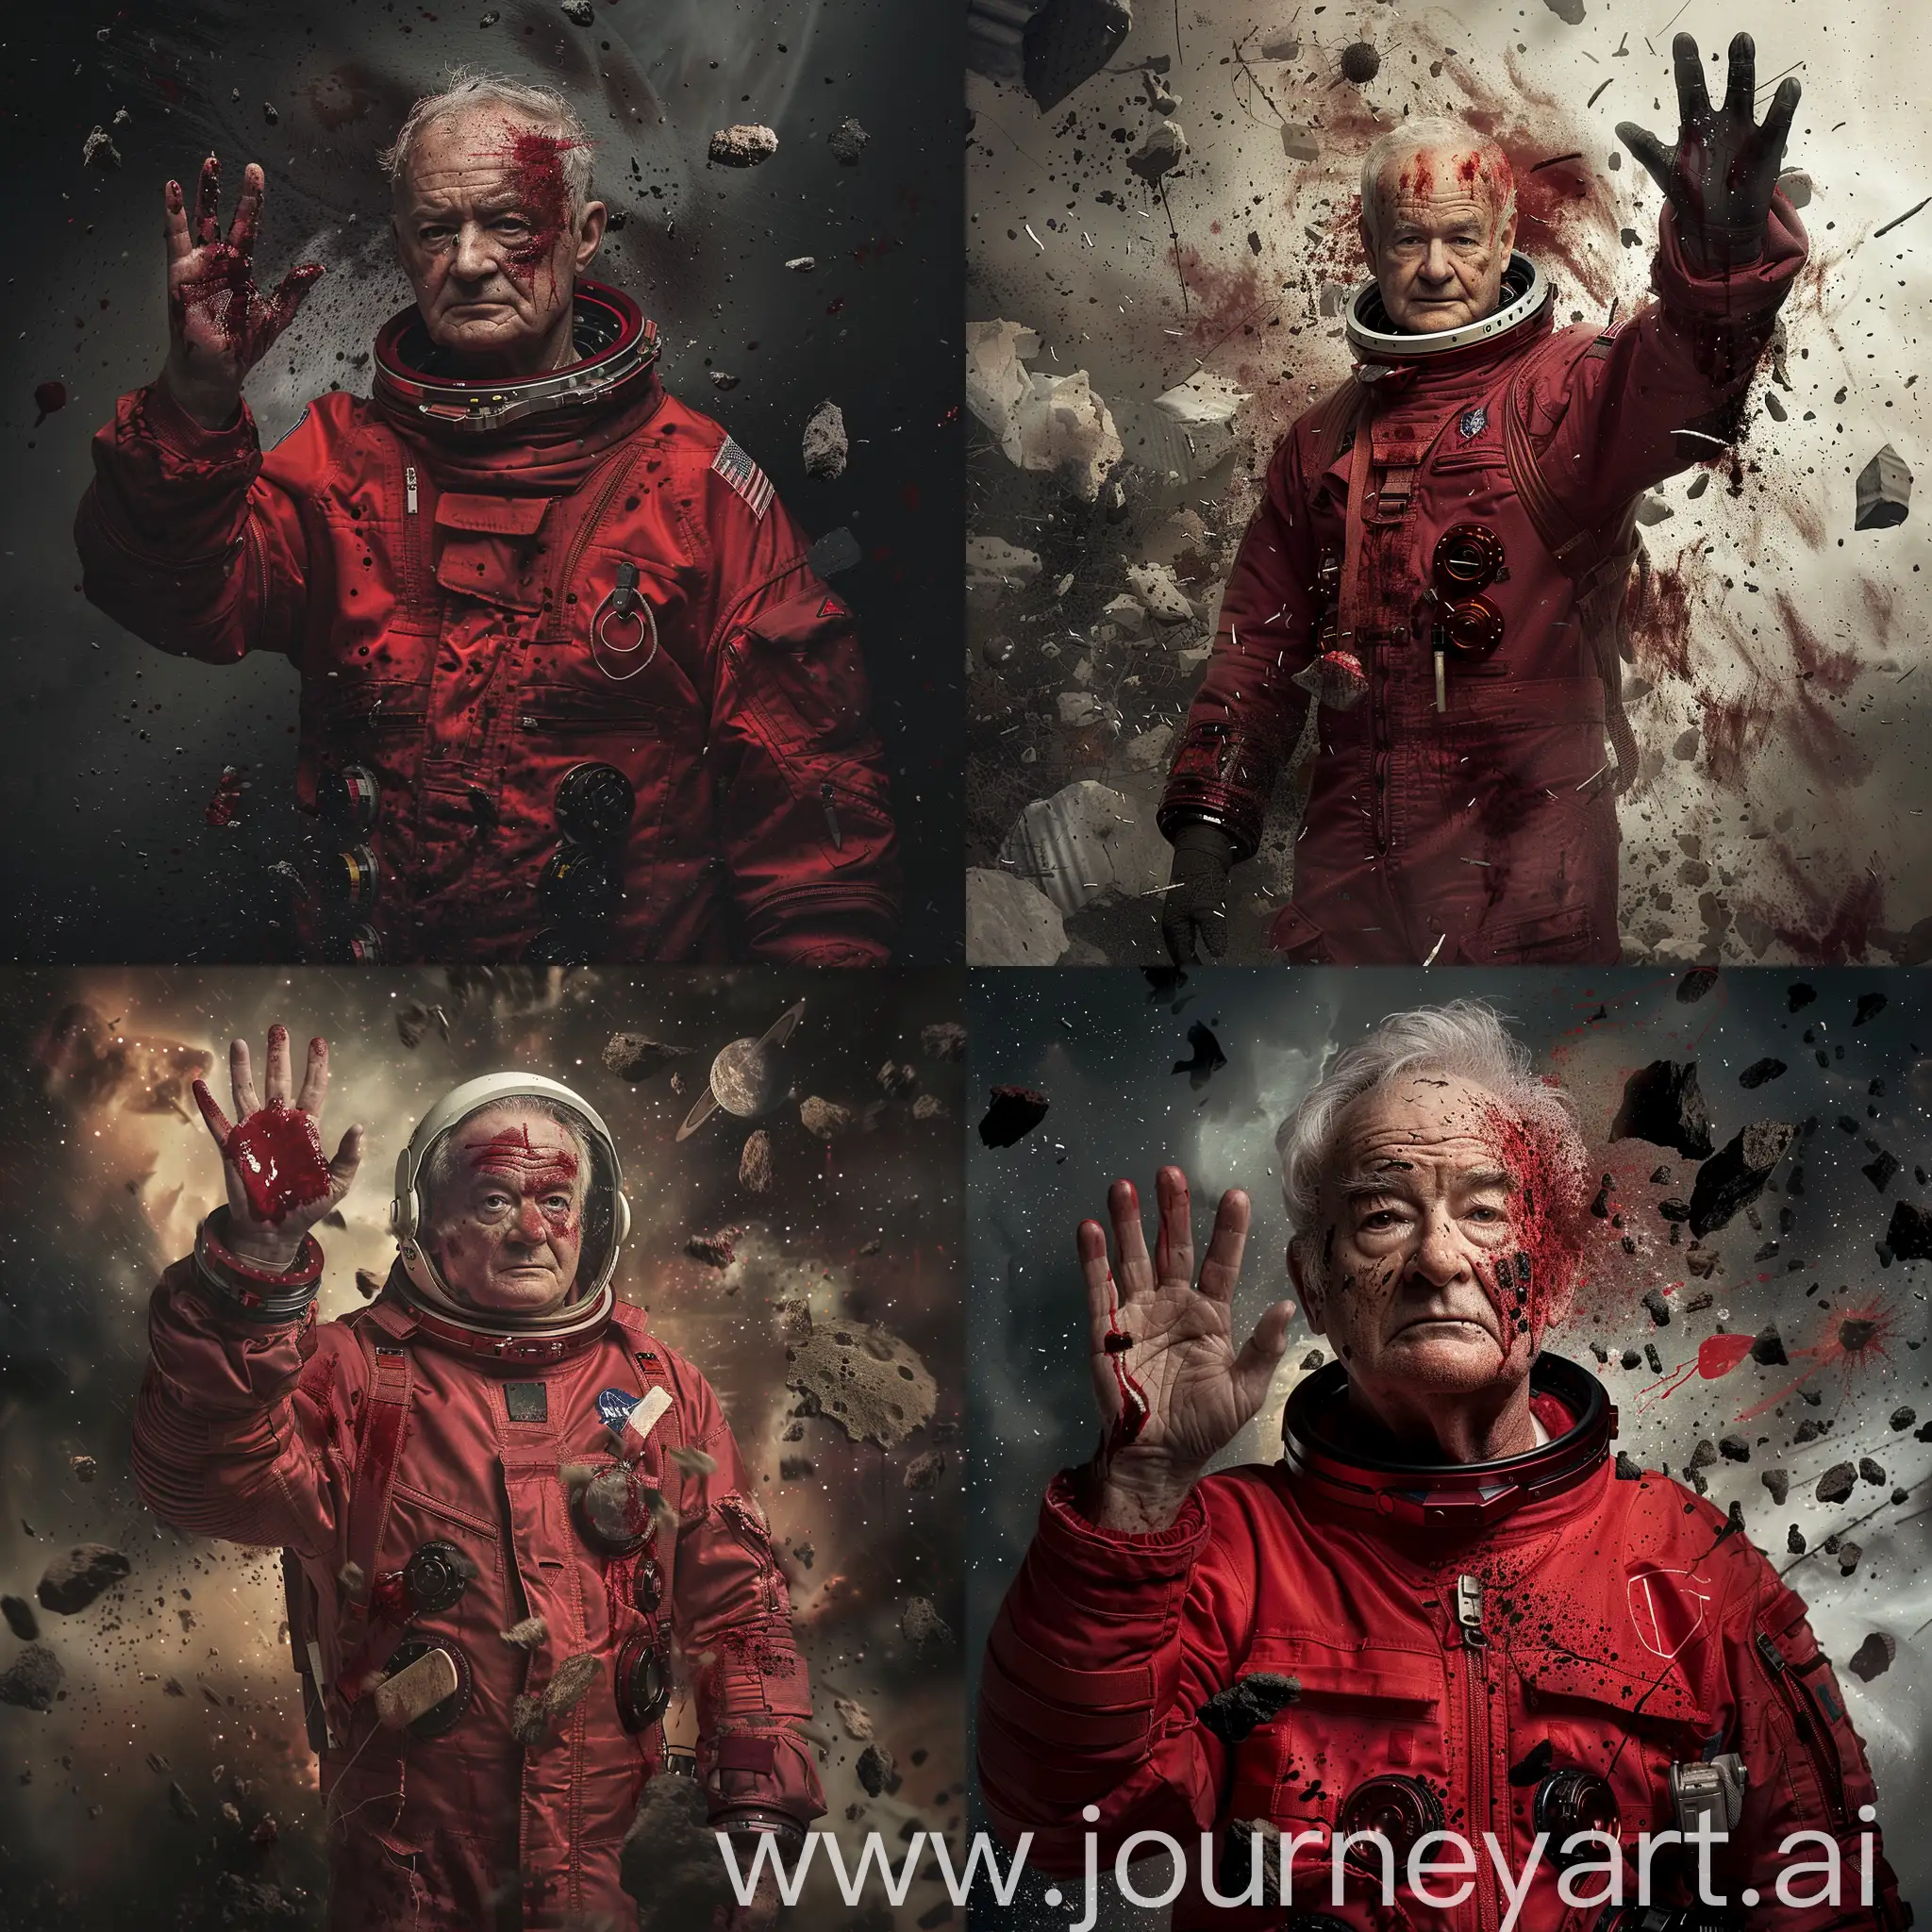 Bill Murray, clad in a crimson 1960's space suit, stands amidst the cosmic debris, blood splattered across his weathered face. Without a helmet, he defiantly holds up the hush hand gesture, a silent guardian amidst the vast unknown of the interstellar journey.